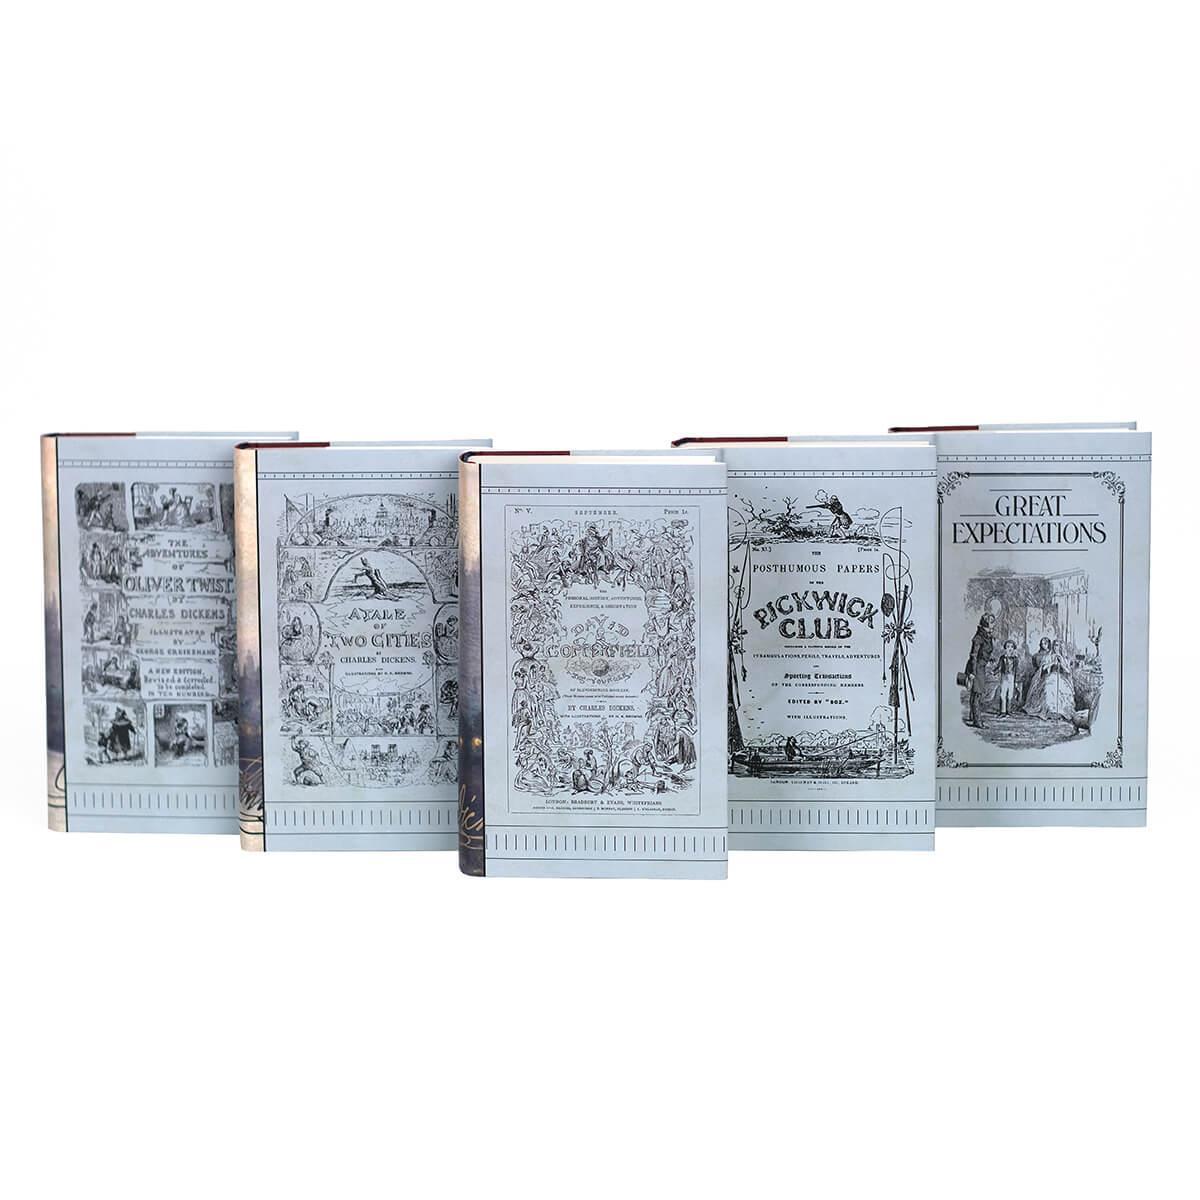 All five books from the Juniper Book Charles Dickens set lined up with illustrated covers facing camera. Each dust jacket cover features a illustration from Dickens books on a light blue background